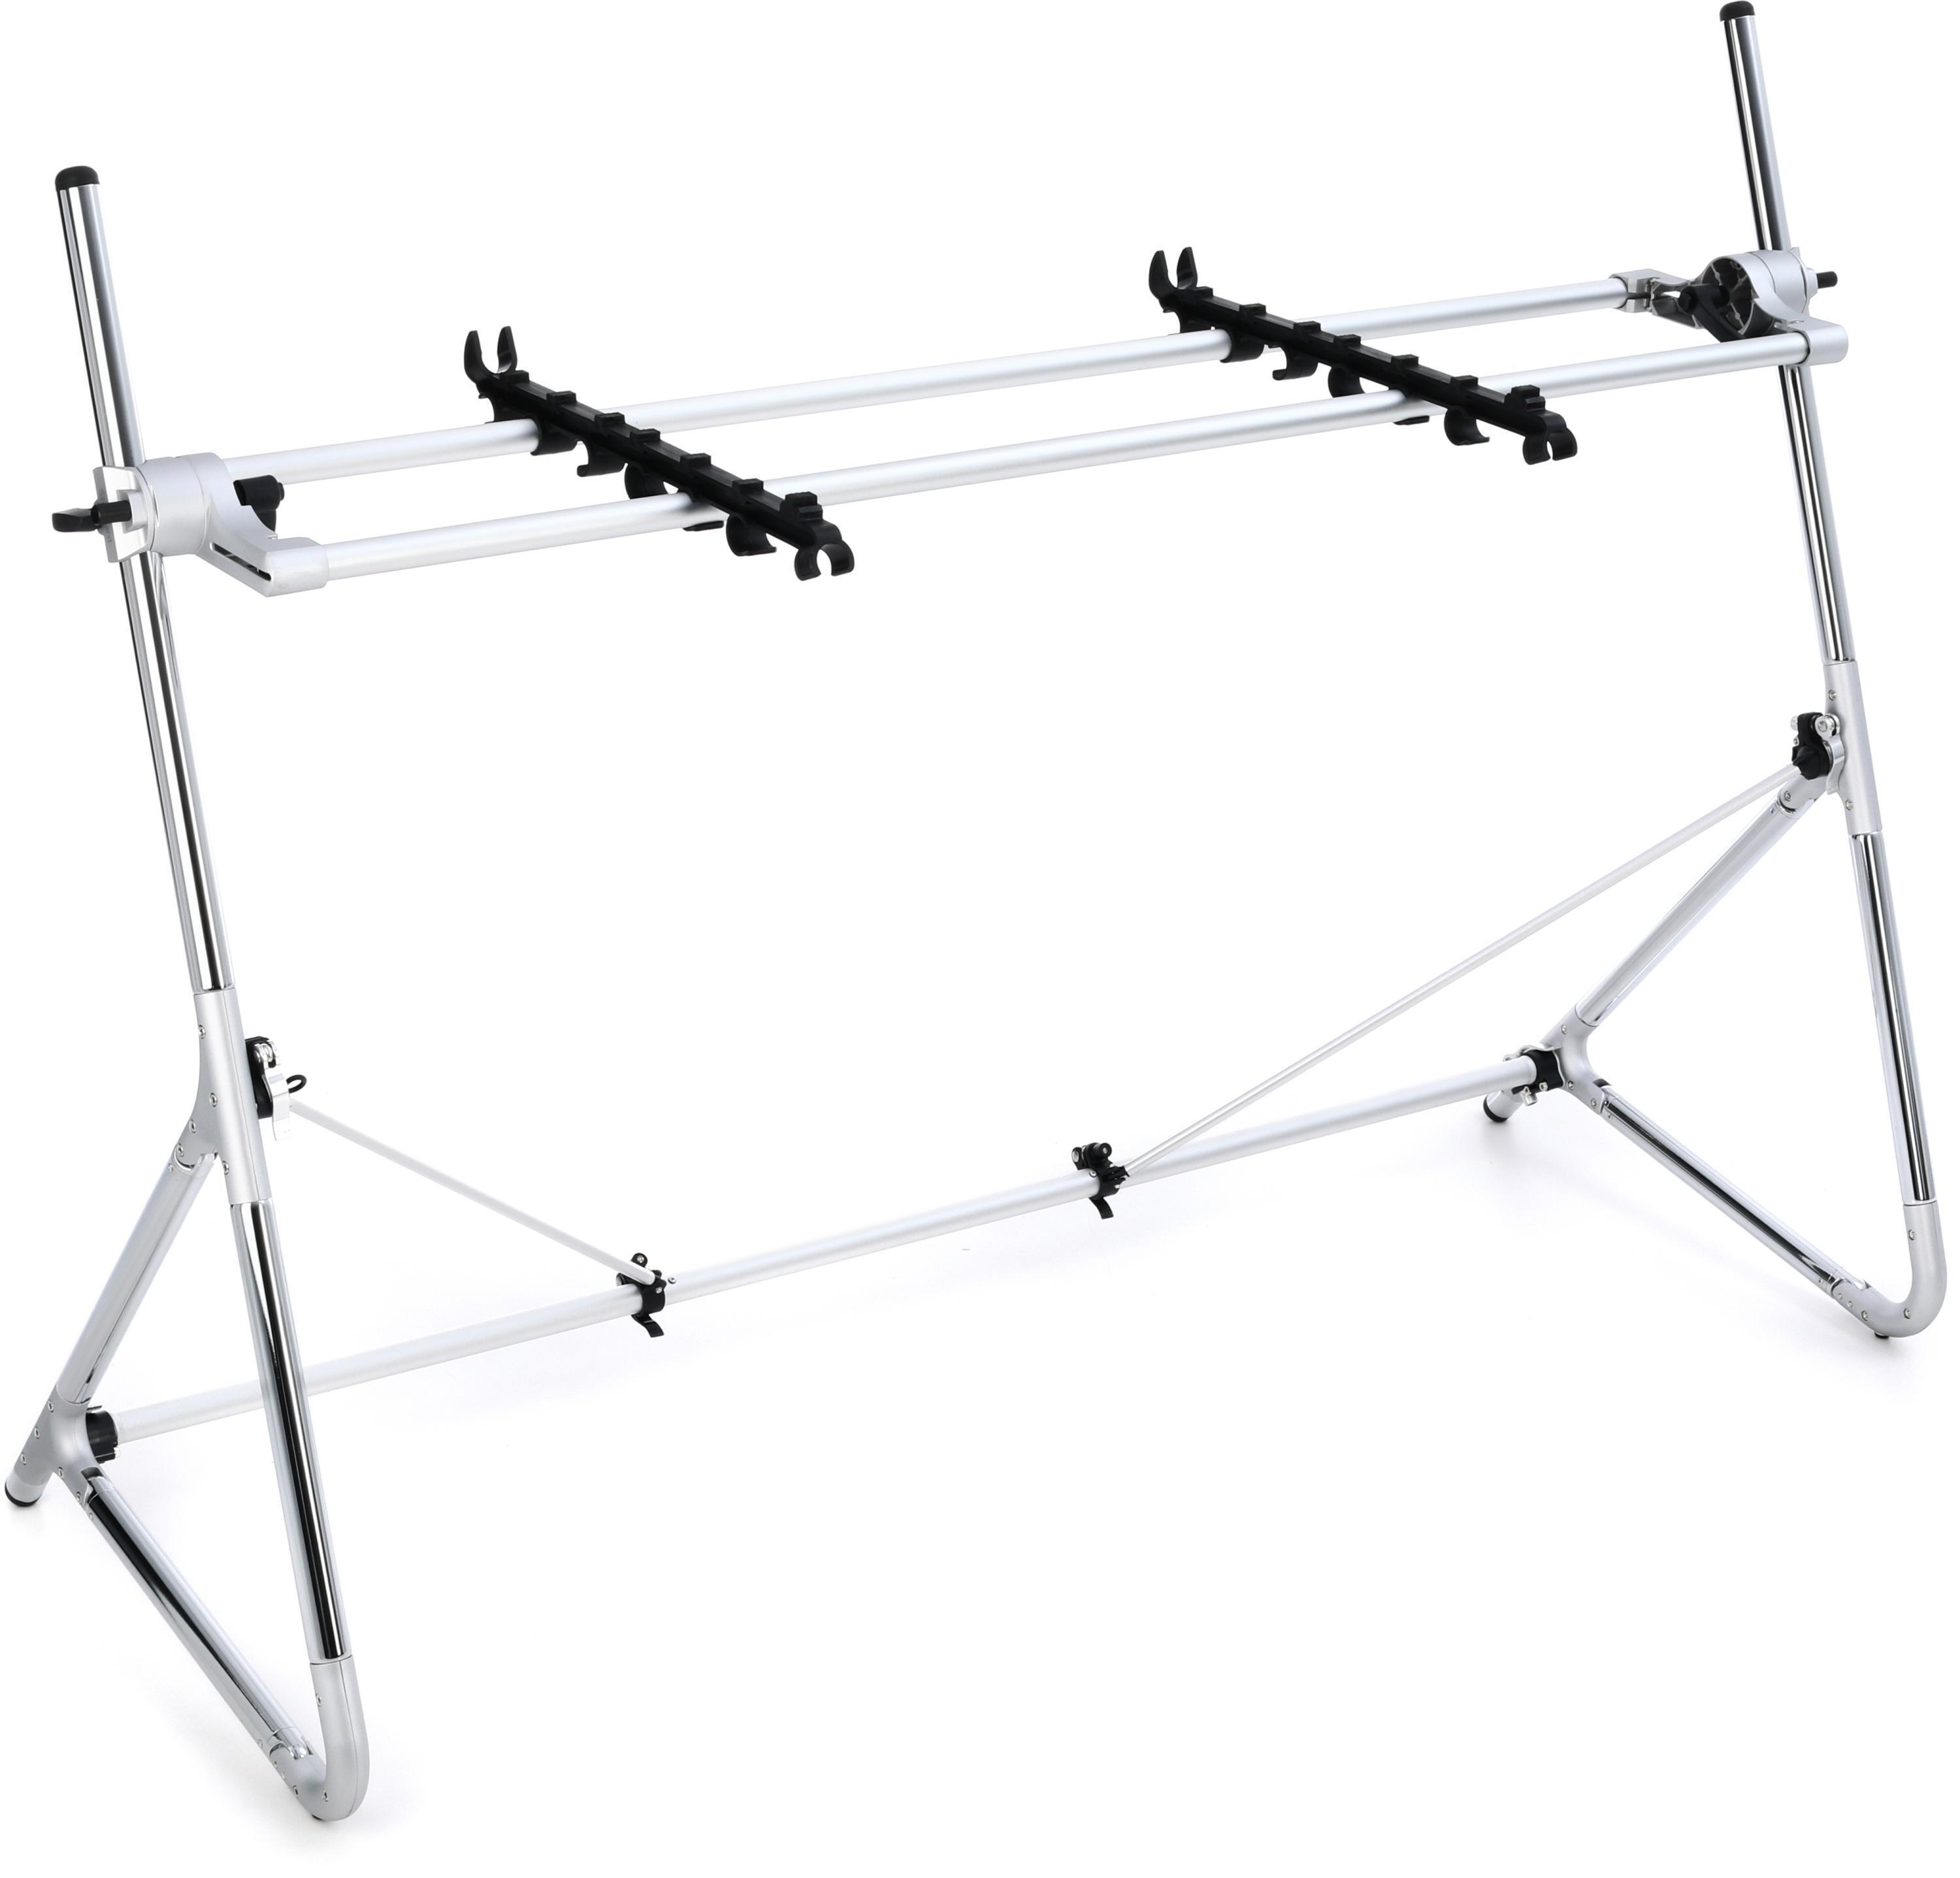 Sequenz Standard-L-SV Large Keyboard Stand - Silver | Sweetwater